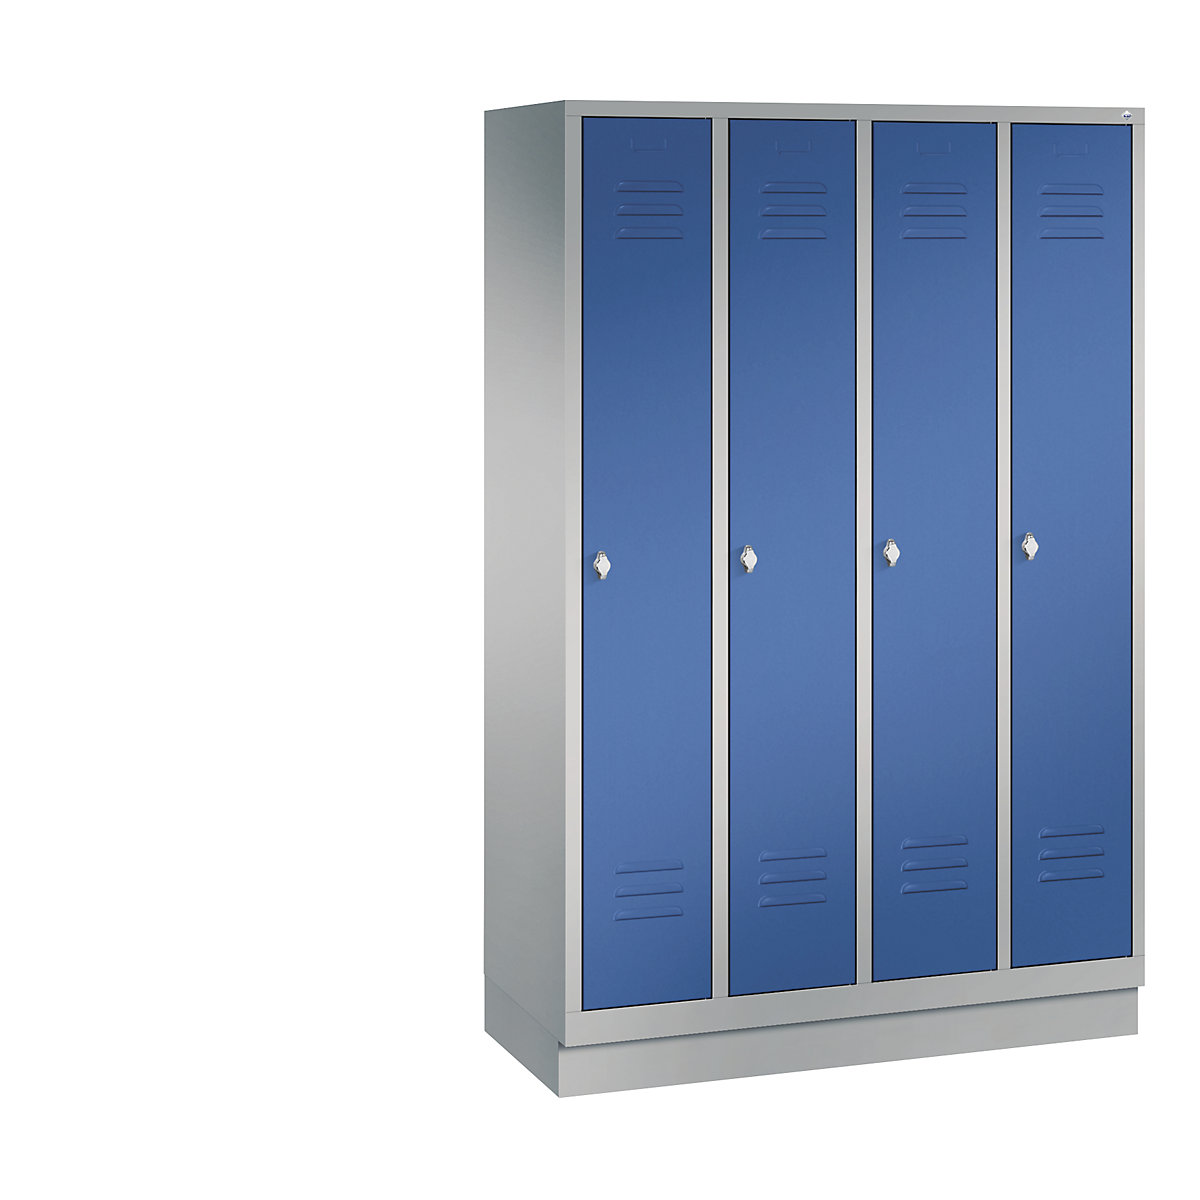 CLASSIC cloakroom locker with plinth – C+P, 4 compartments, compartment width 300 mm, white aluminium / gentian blue-13